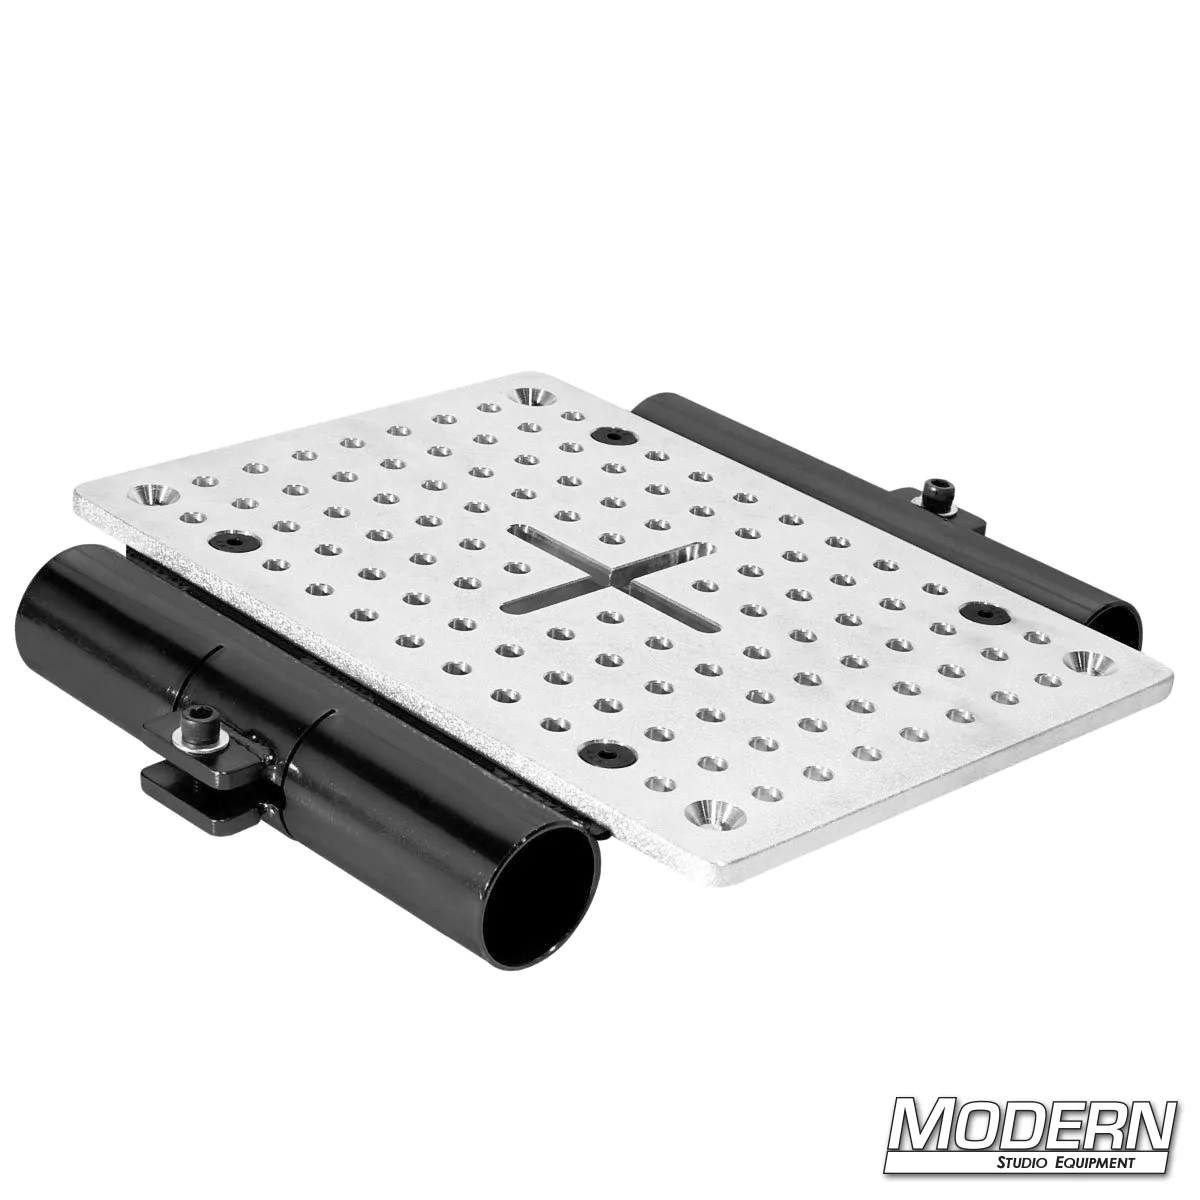 Cheese Plate with 3/8-inch Slot and Two 1-1/4-inch Slider Brackets for Hood Mount - Black Zinc